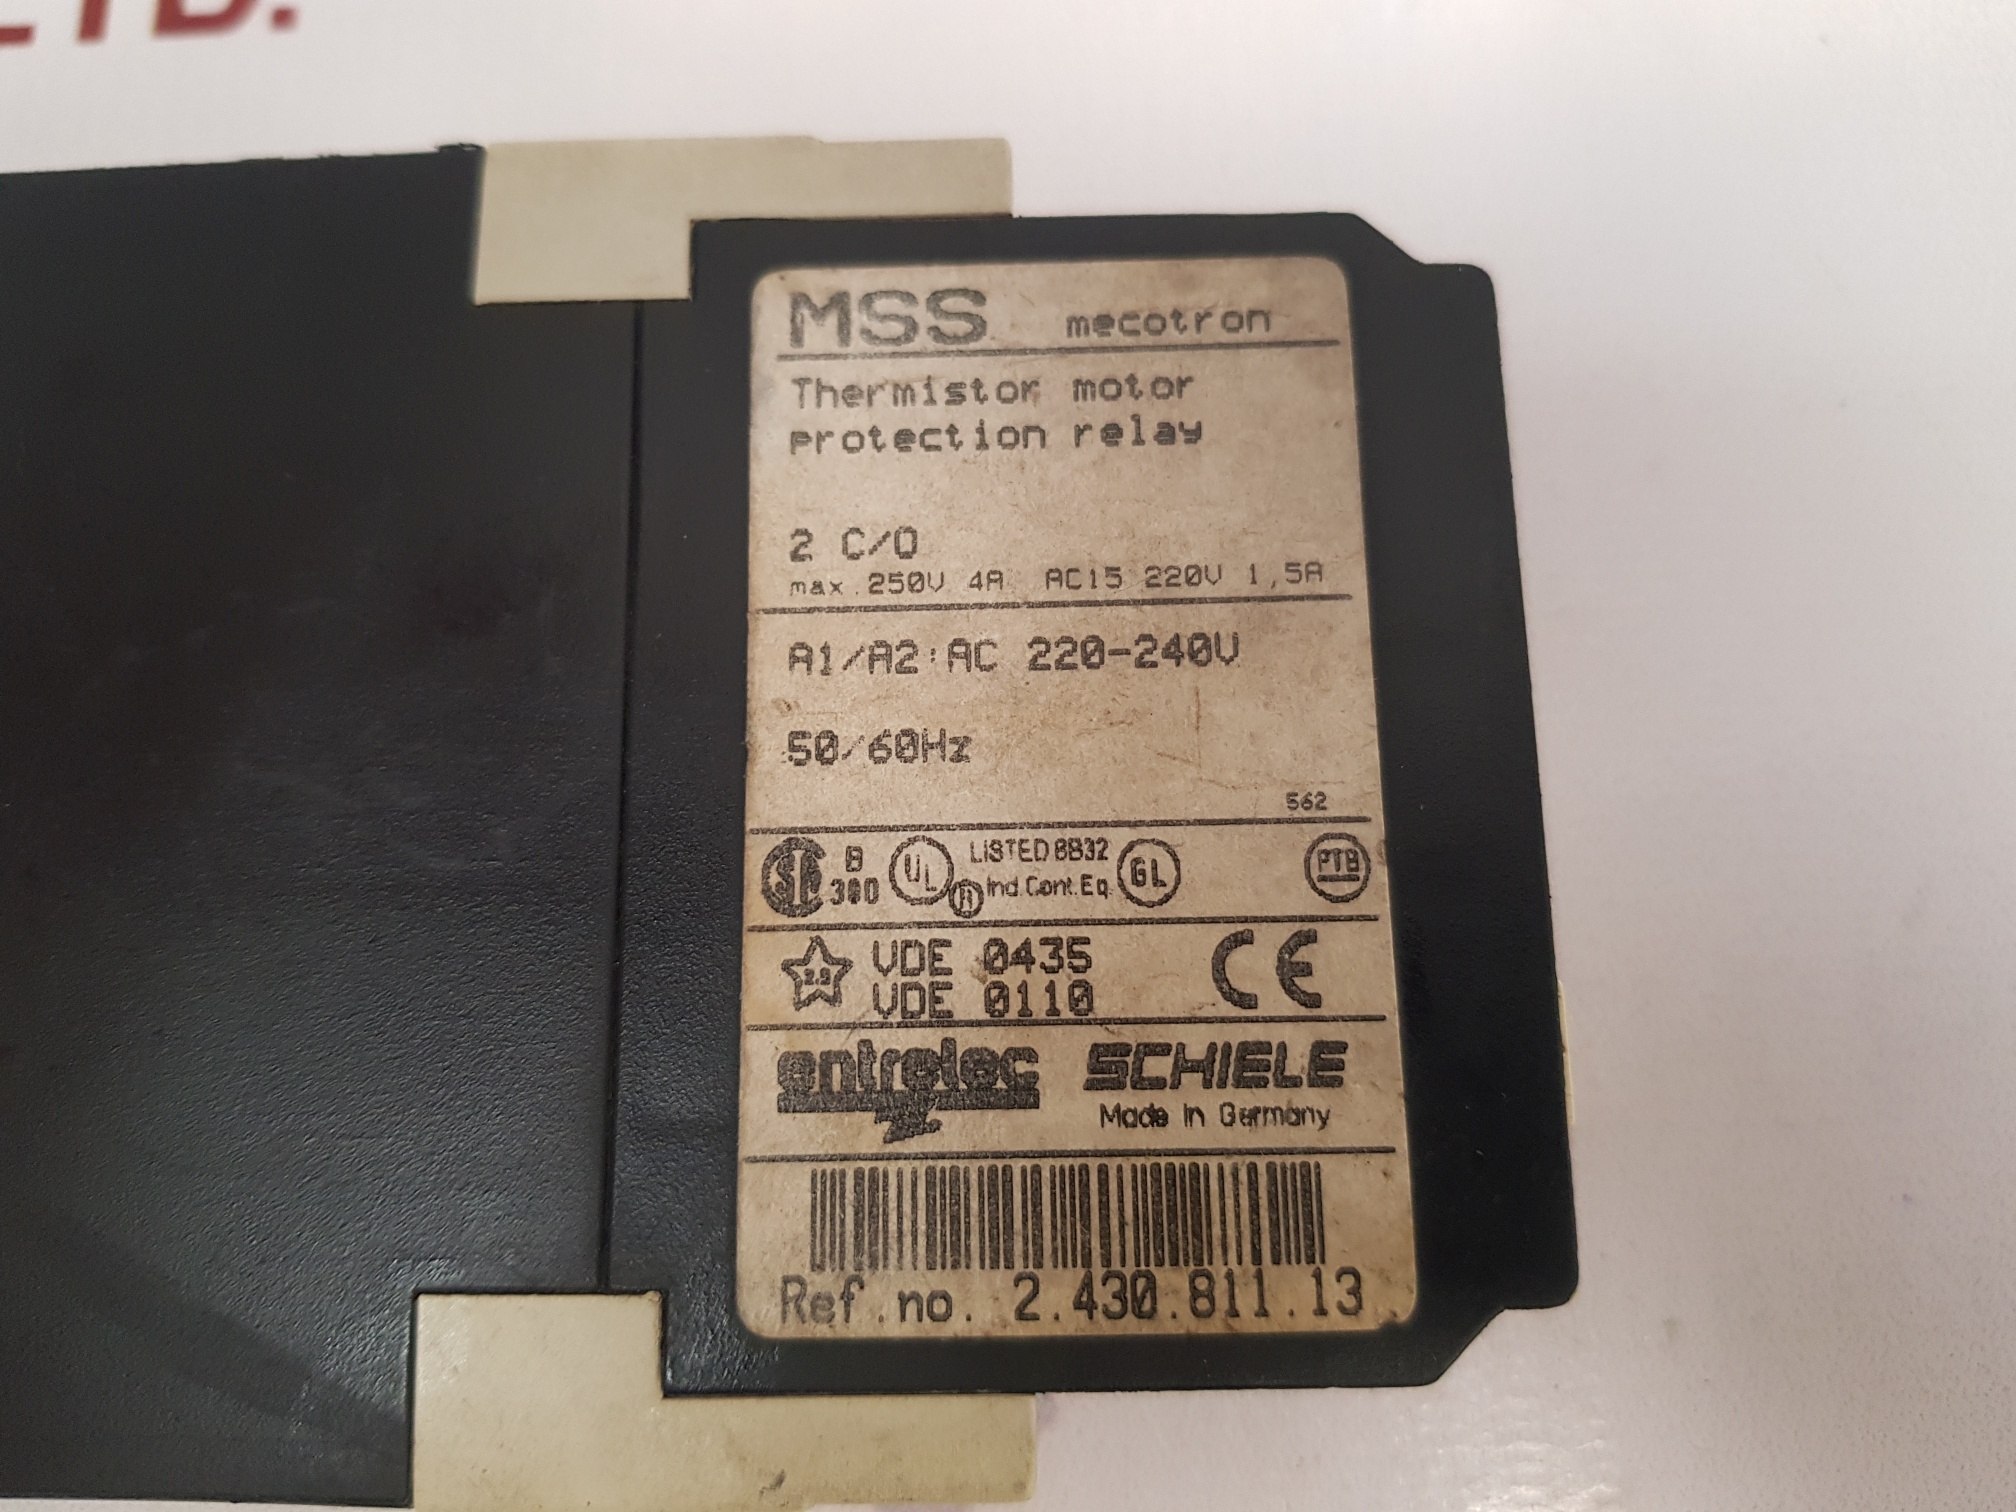 ENTRELEC MSS MECOTRON THERMISTOR MOTOR PROTECTION RELAY